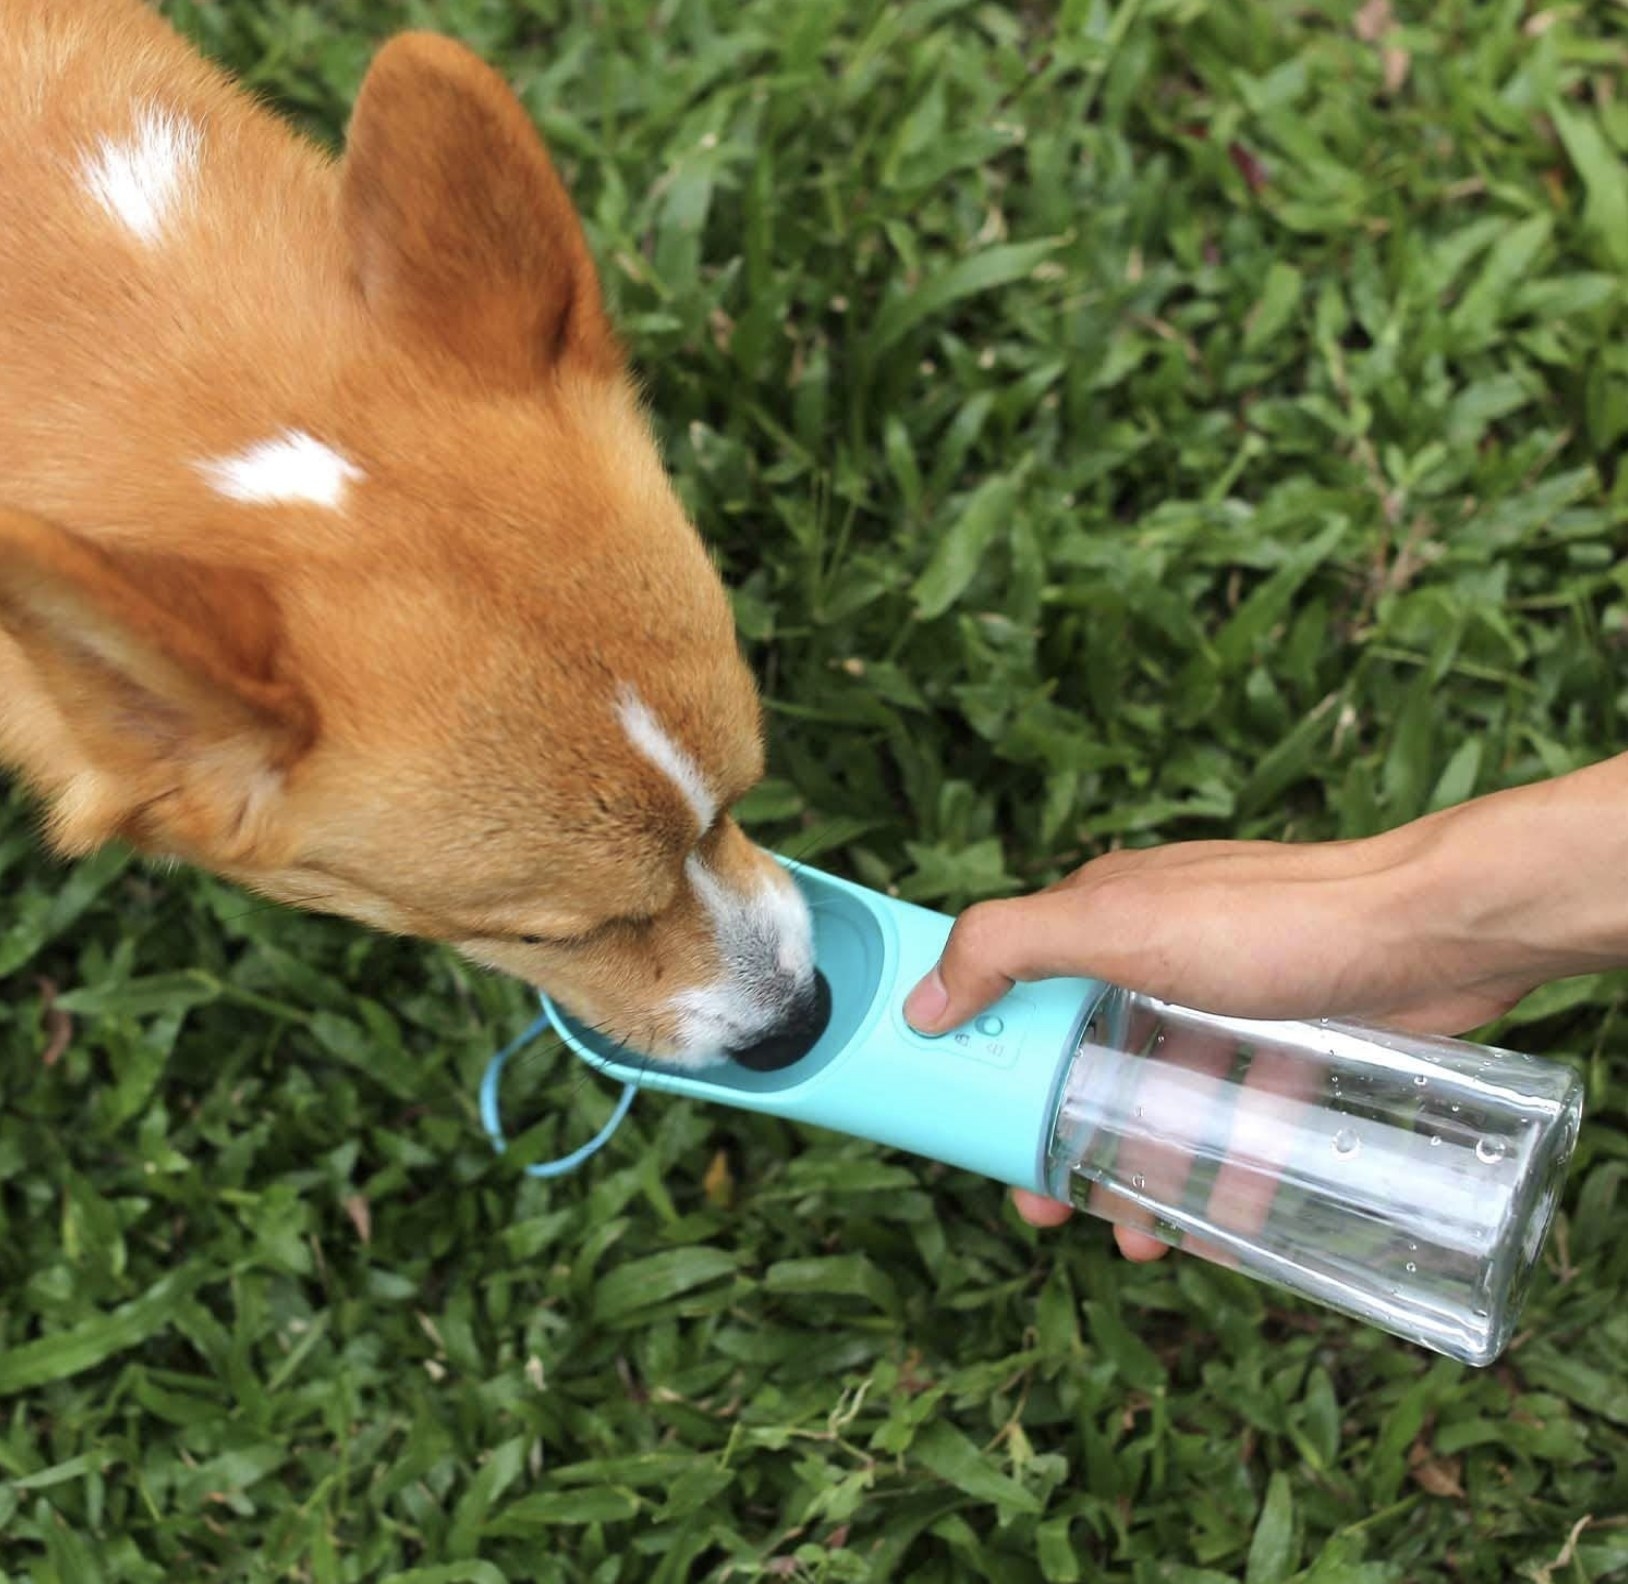 A dog drinking from the blue bottle 